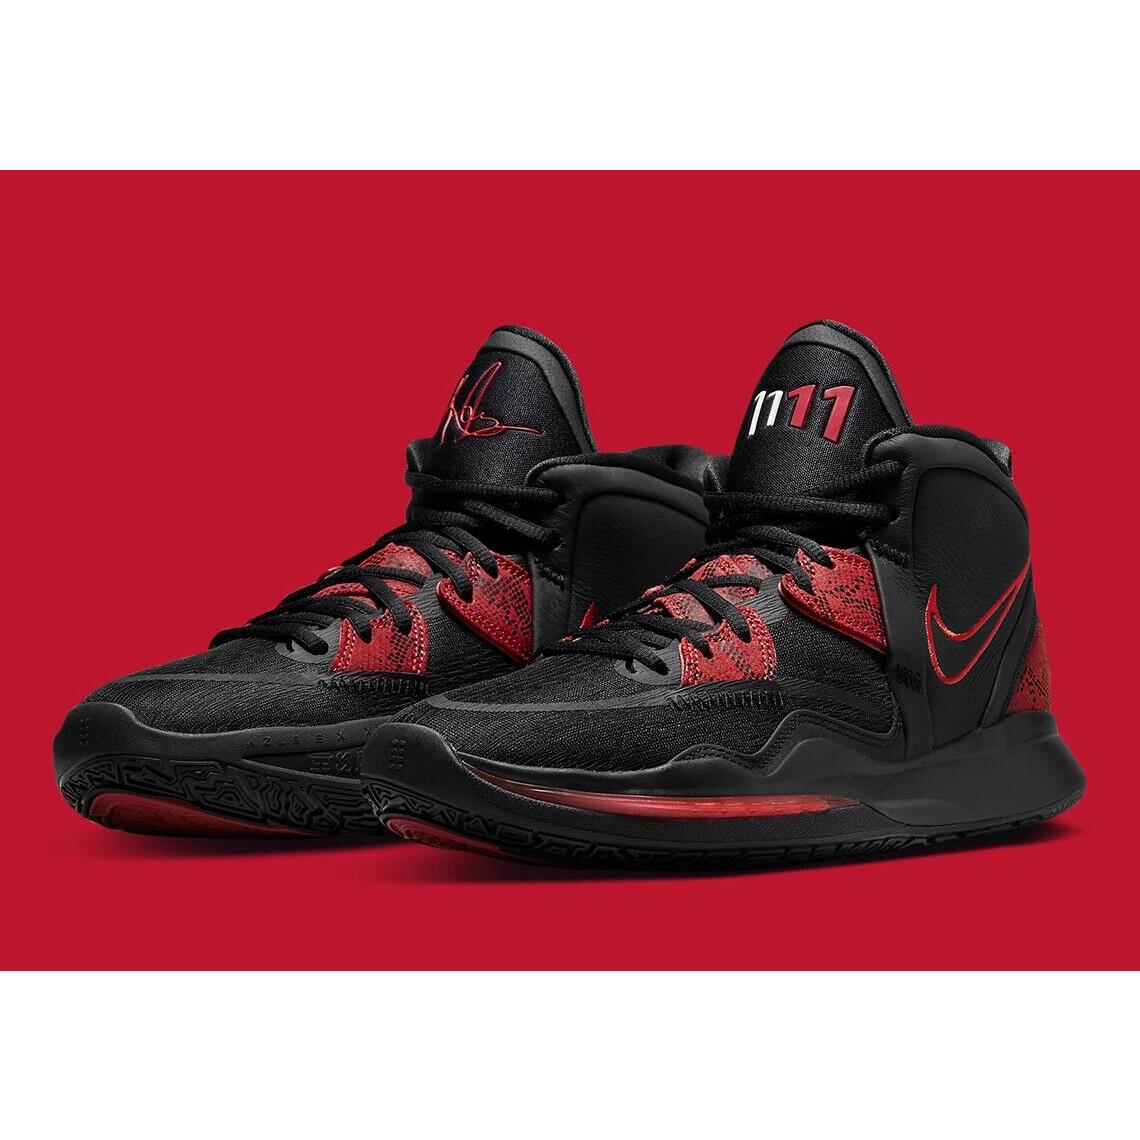 Nike Kyrie 8 Infinity Shoes Bred 2022 Black Red CZ0204 004 - Size 11 Mens